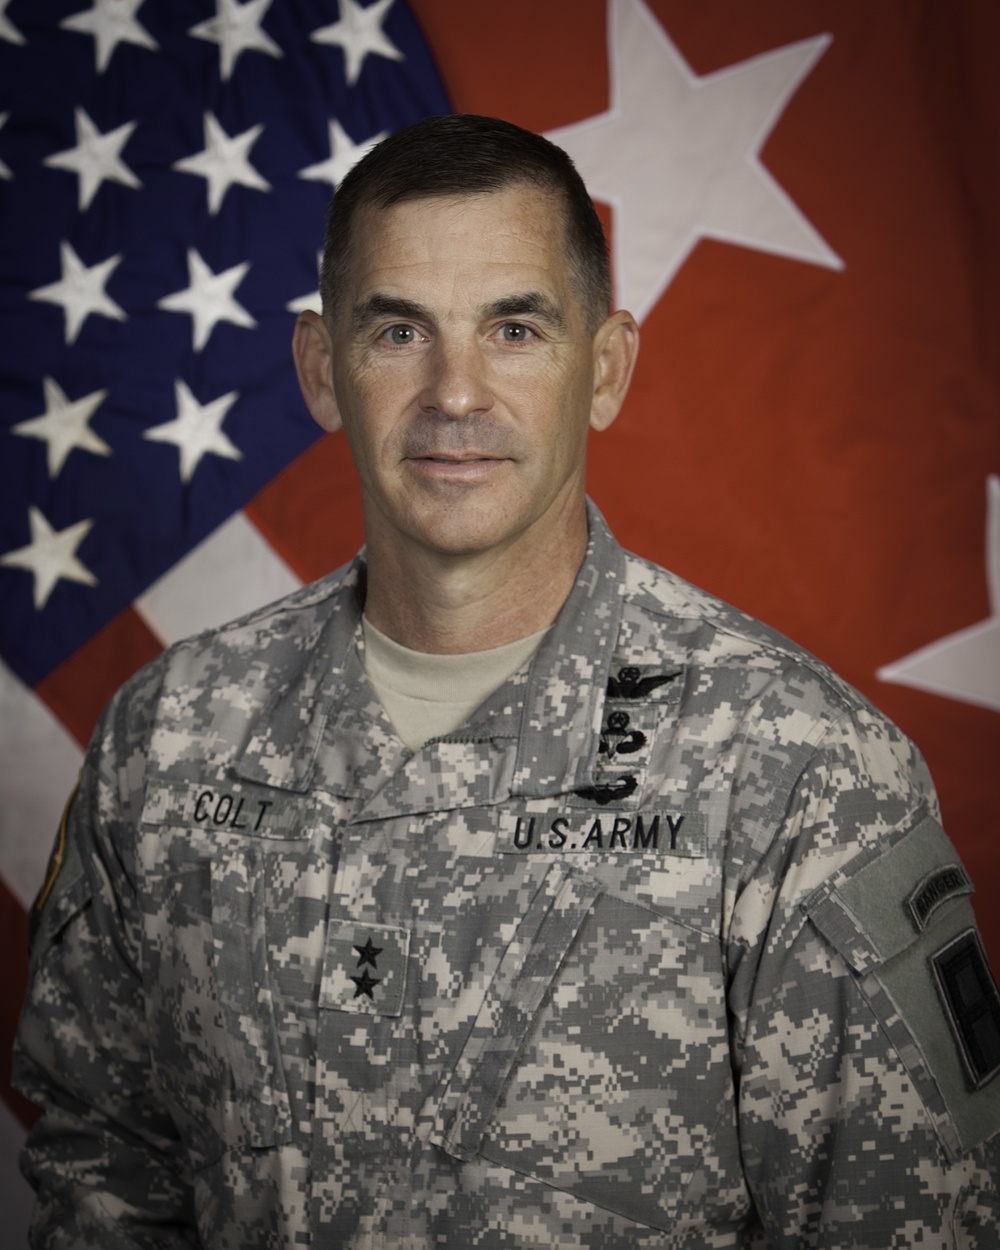 DVIDS - News - Colt to assume command of Division West